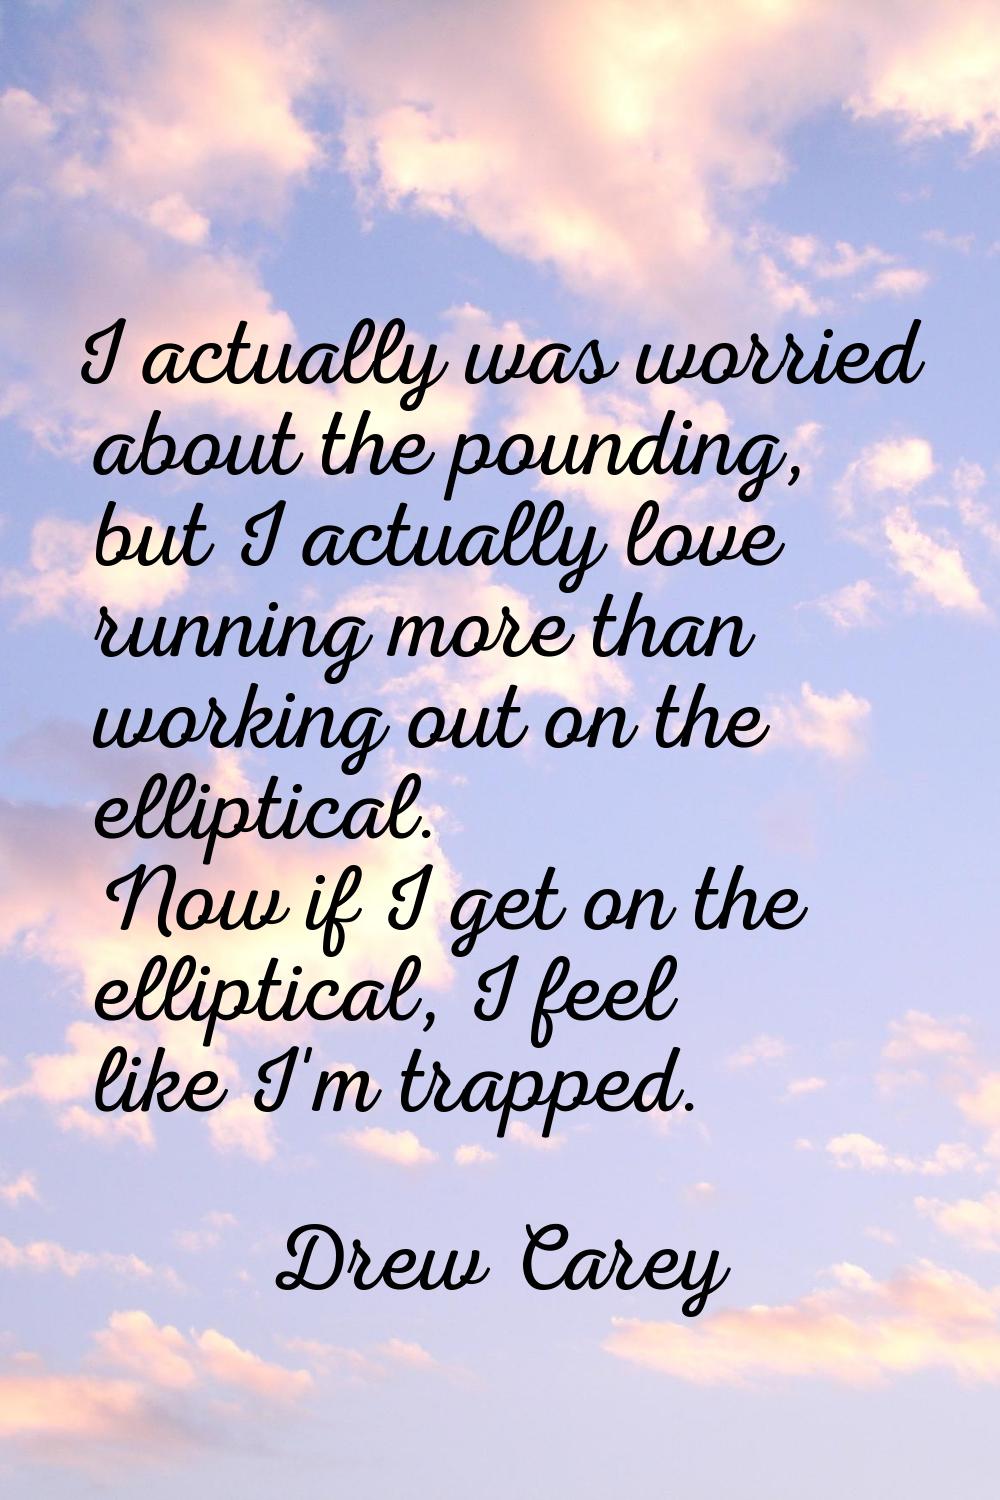 I actually was worried about the pounding, but I actually love running more than working out on the